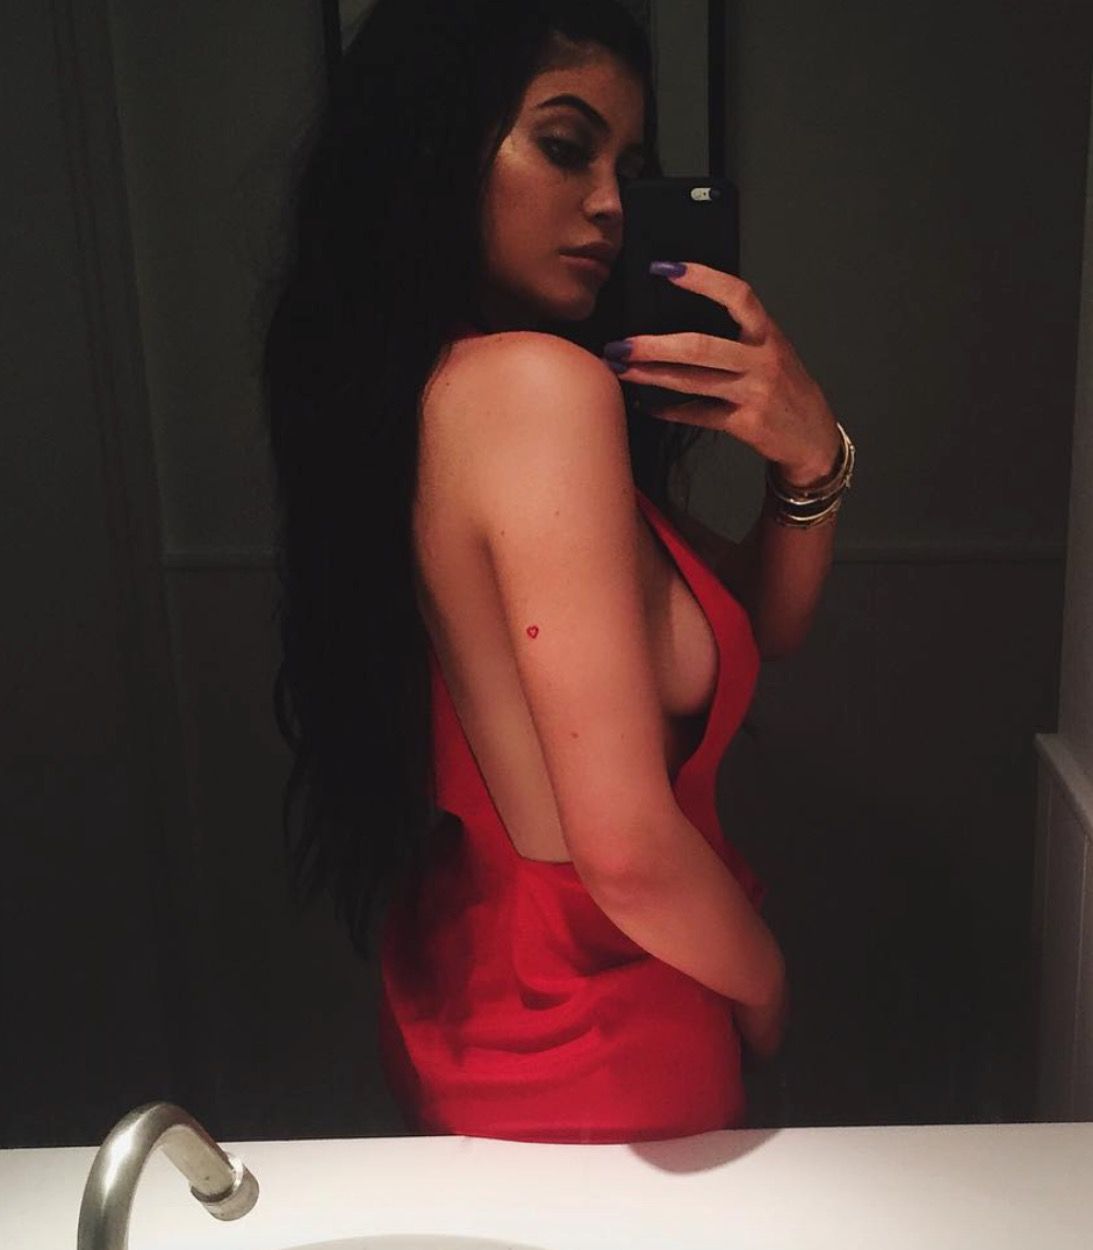 Keeping Up With The Kardashians - Kylie Jenner - tattoos